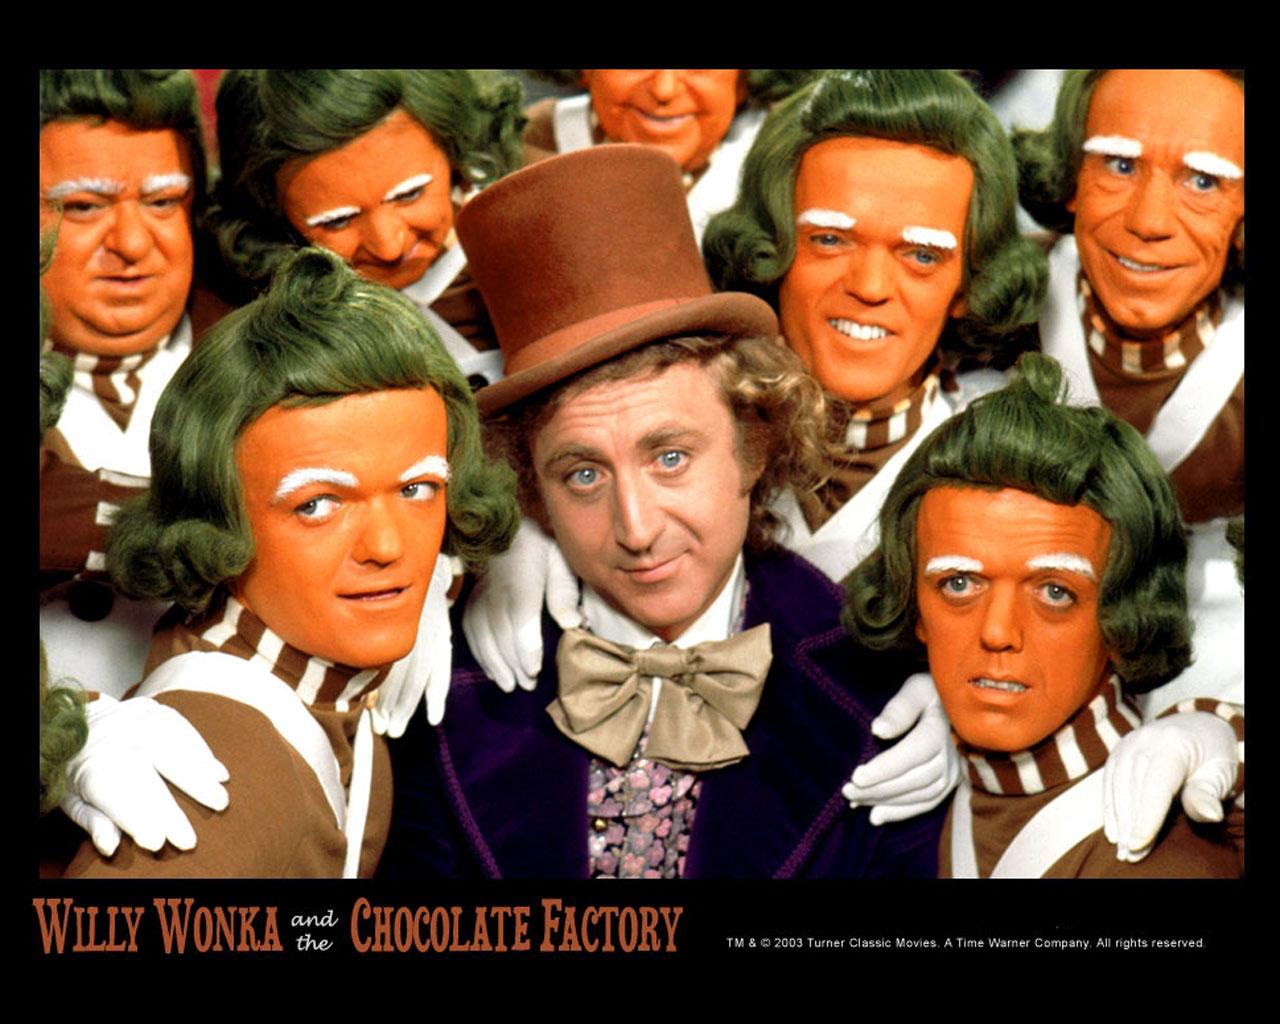 Willy Wonka & The Chocolate Factory -  Wallpaper #1 1280 x 1024 